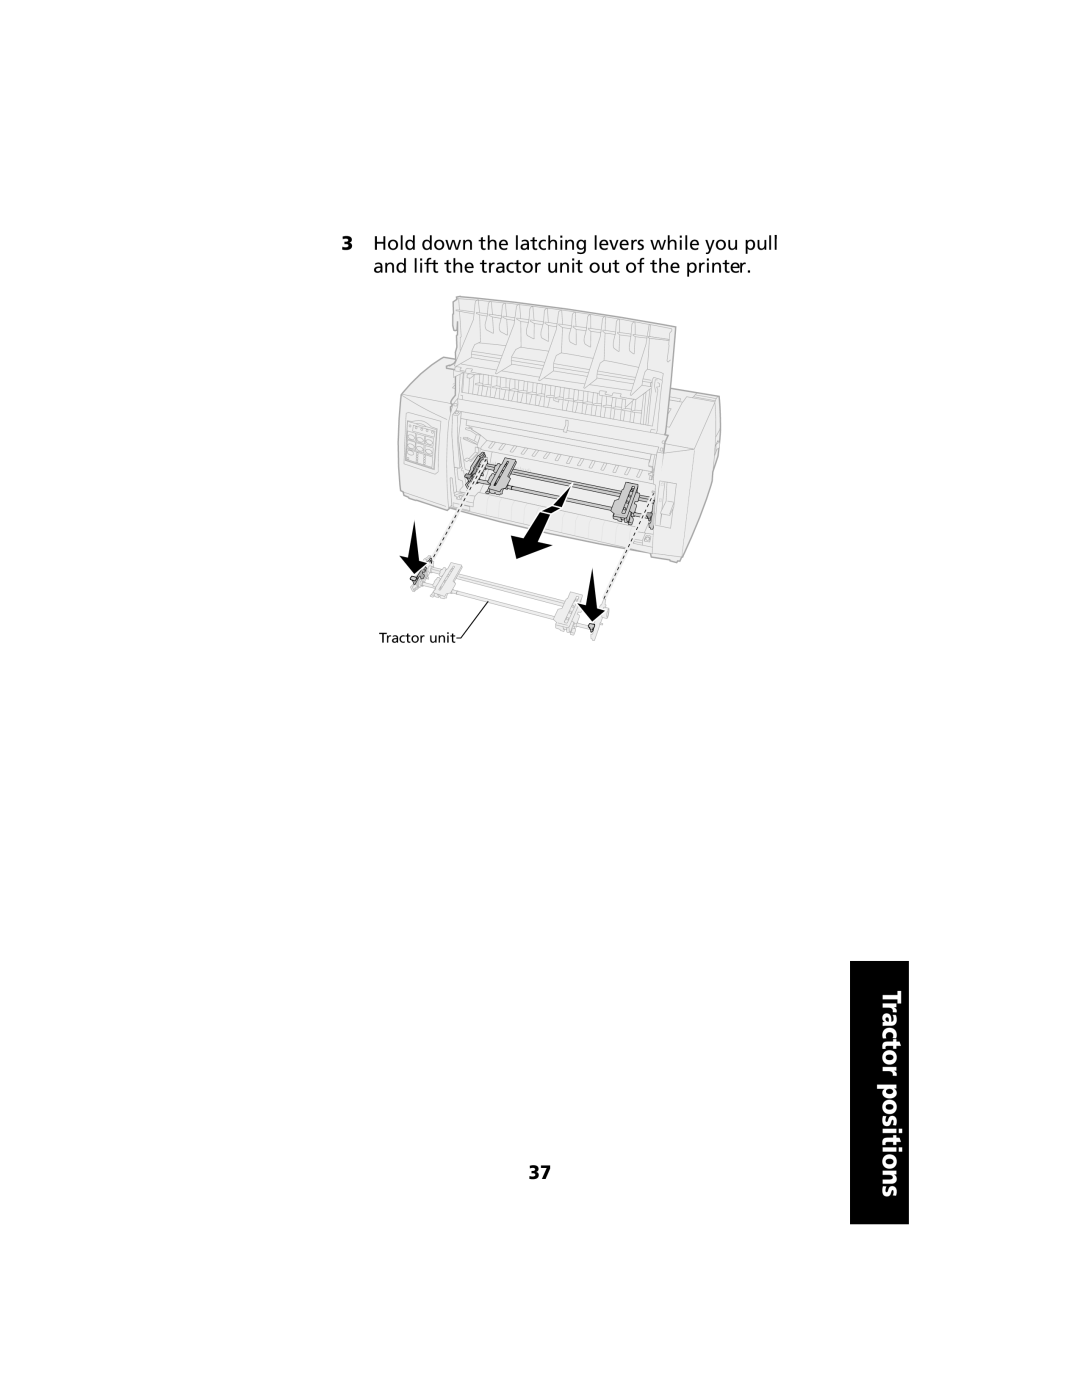 Lexmark 2480 manual Tractor positions, Tractor unit 